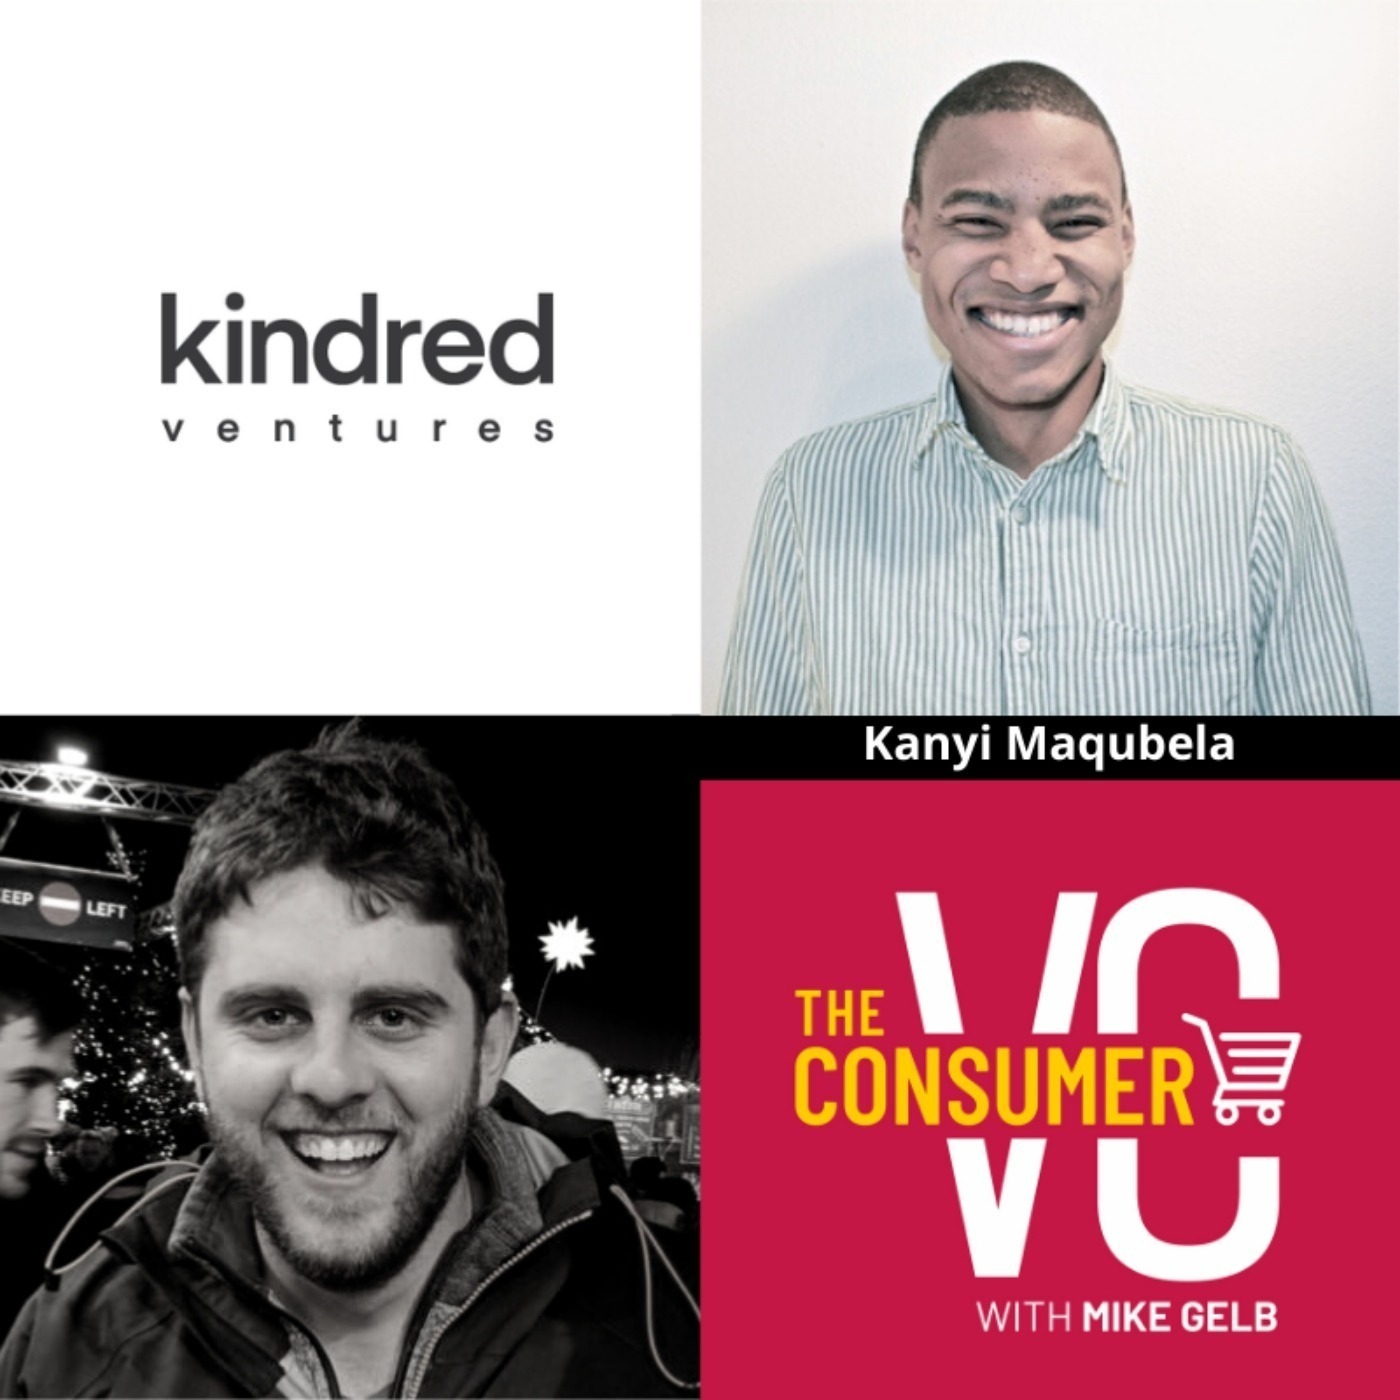 Kanyi Maqubela (Kindred Ventures) - Why There's Been an Explosion in Seed and Late Stage Funds, Diversity Amongst Investors & Market Risk, and Why he's interested in Learning Why Something Is Not Fundable